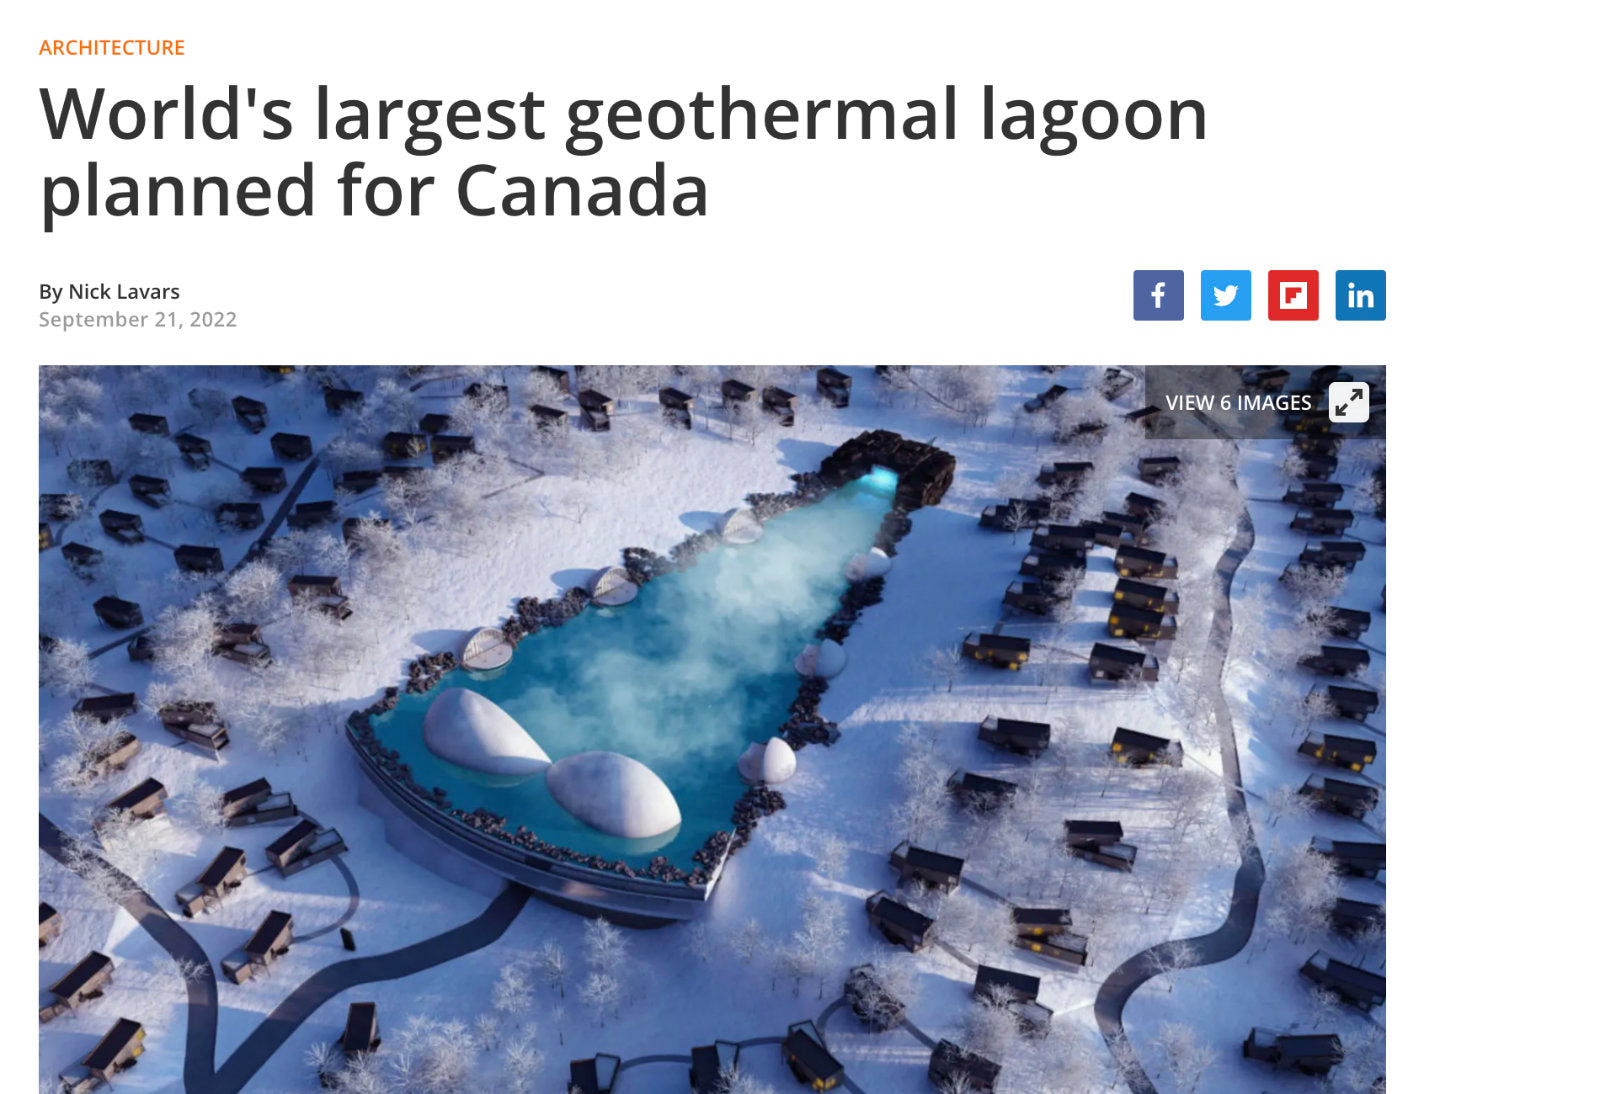 [EN] World's largest geothermal lagoon planned for Canada